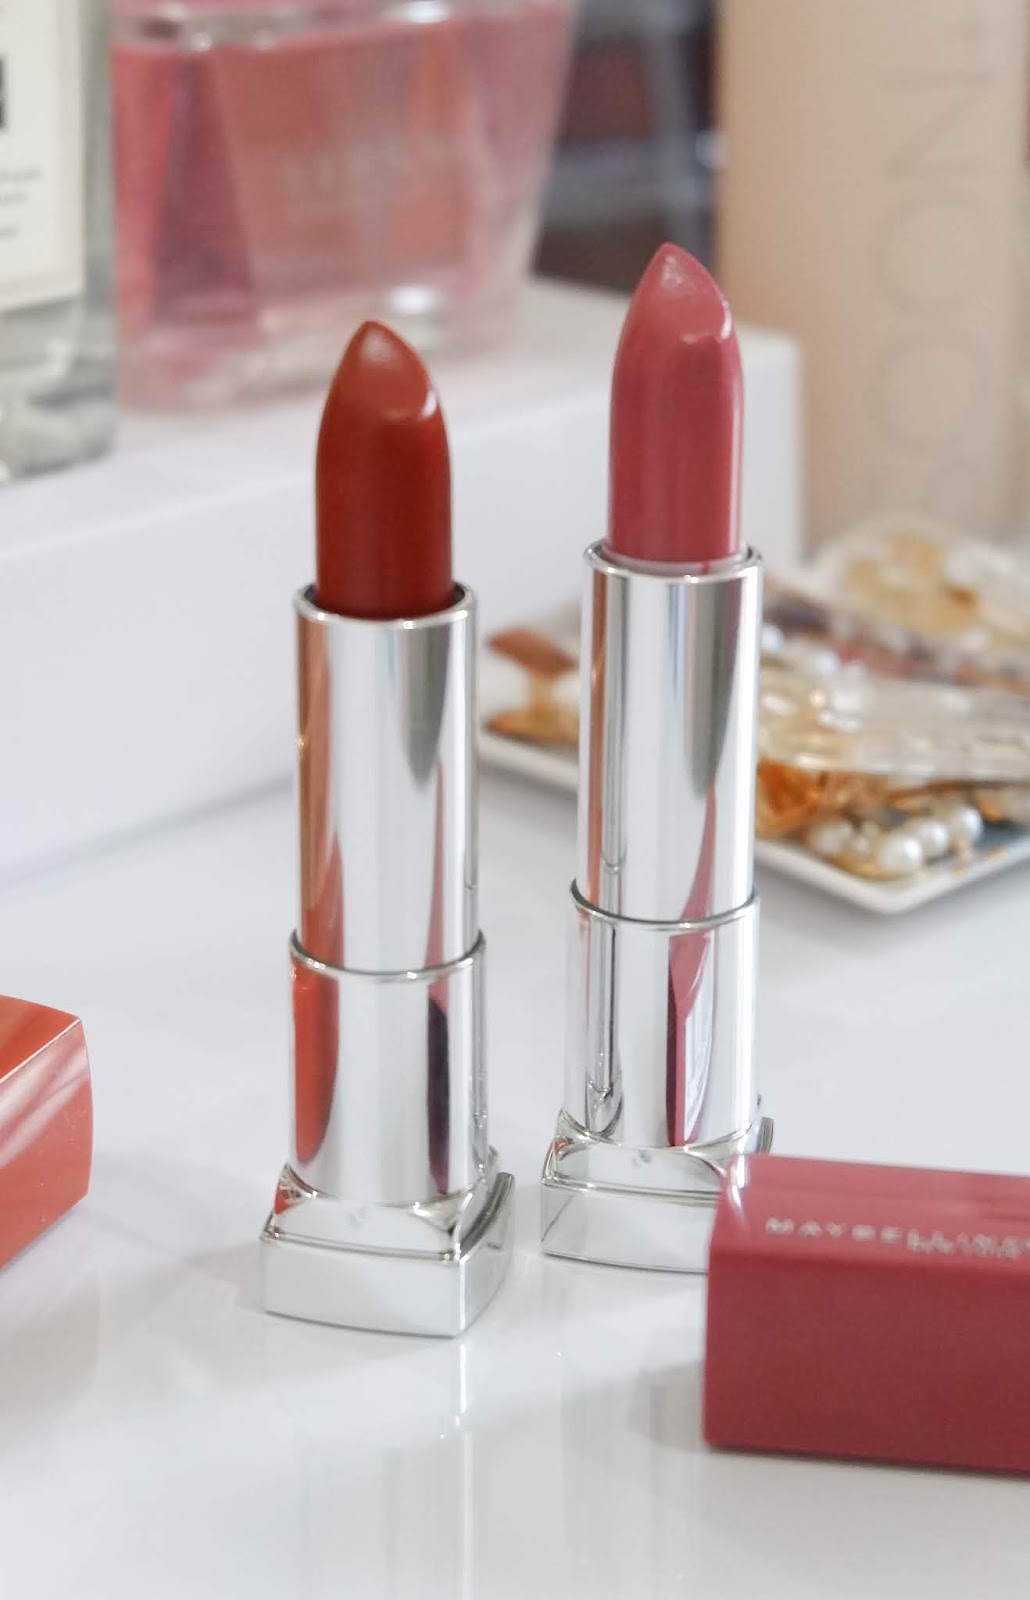 Lipstick maybelline light reviews pink shades stores